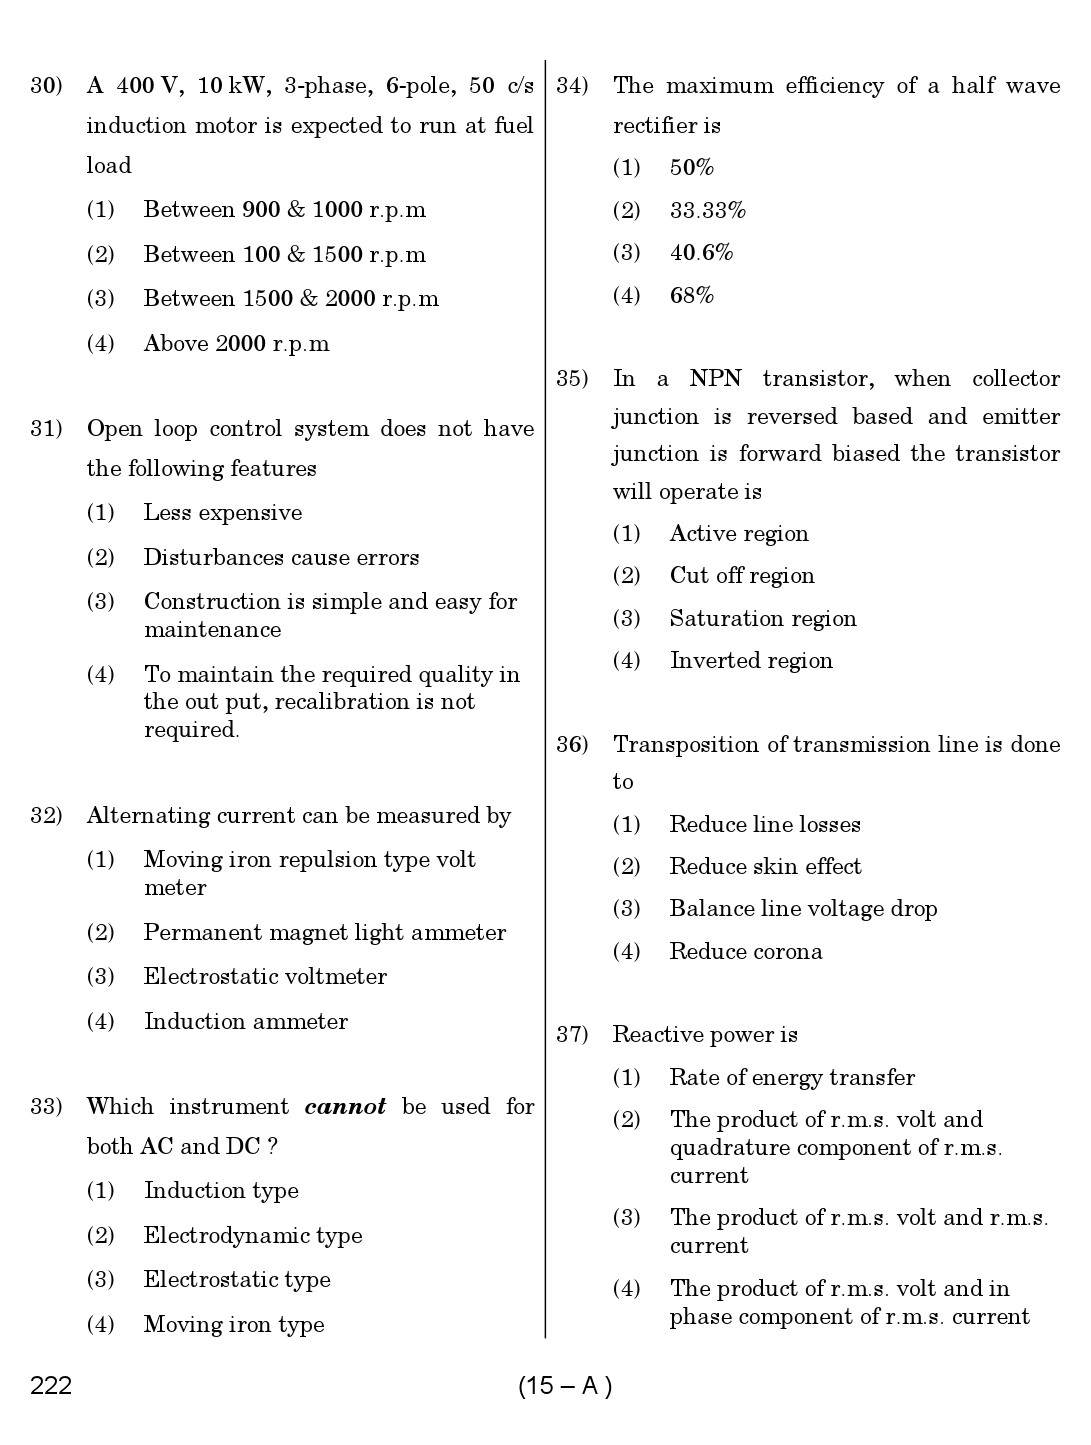 Karnataka PSC Assistant Engineer Electrical Exam Sample Question Paper 15